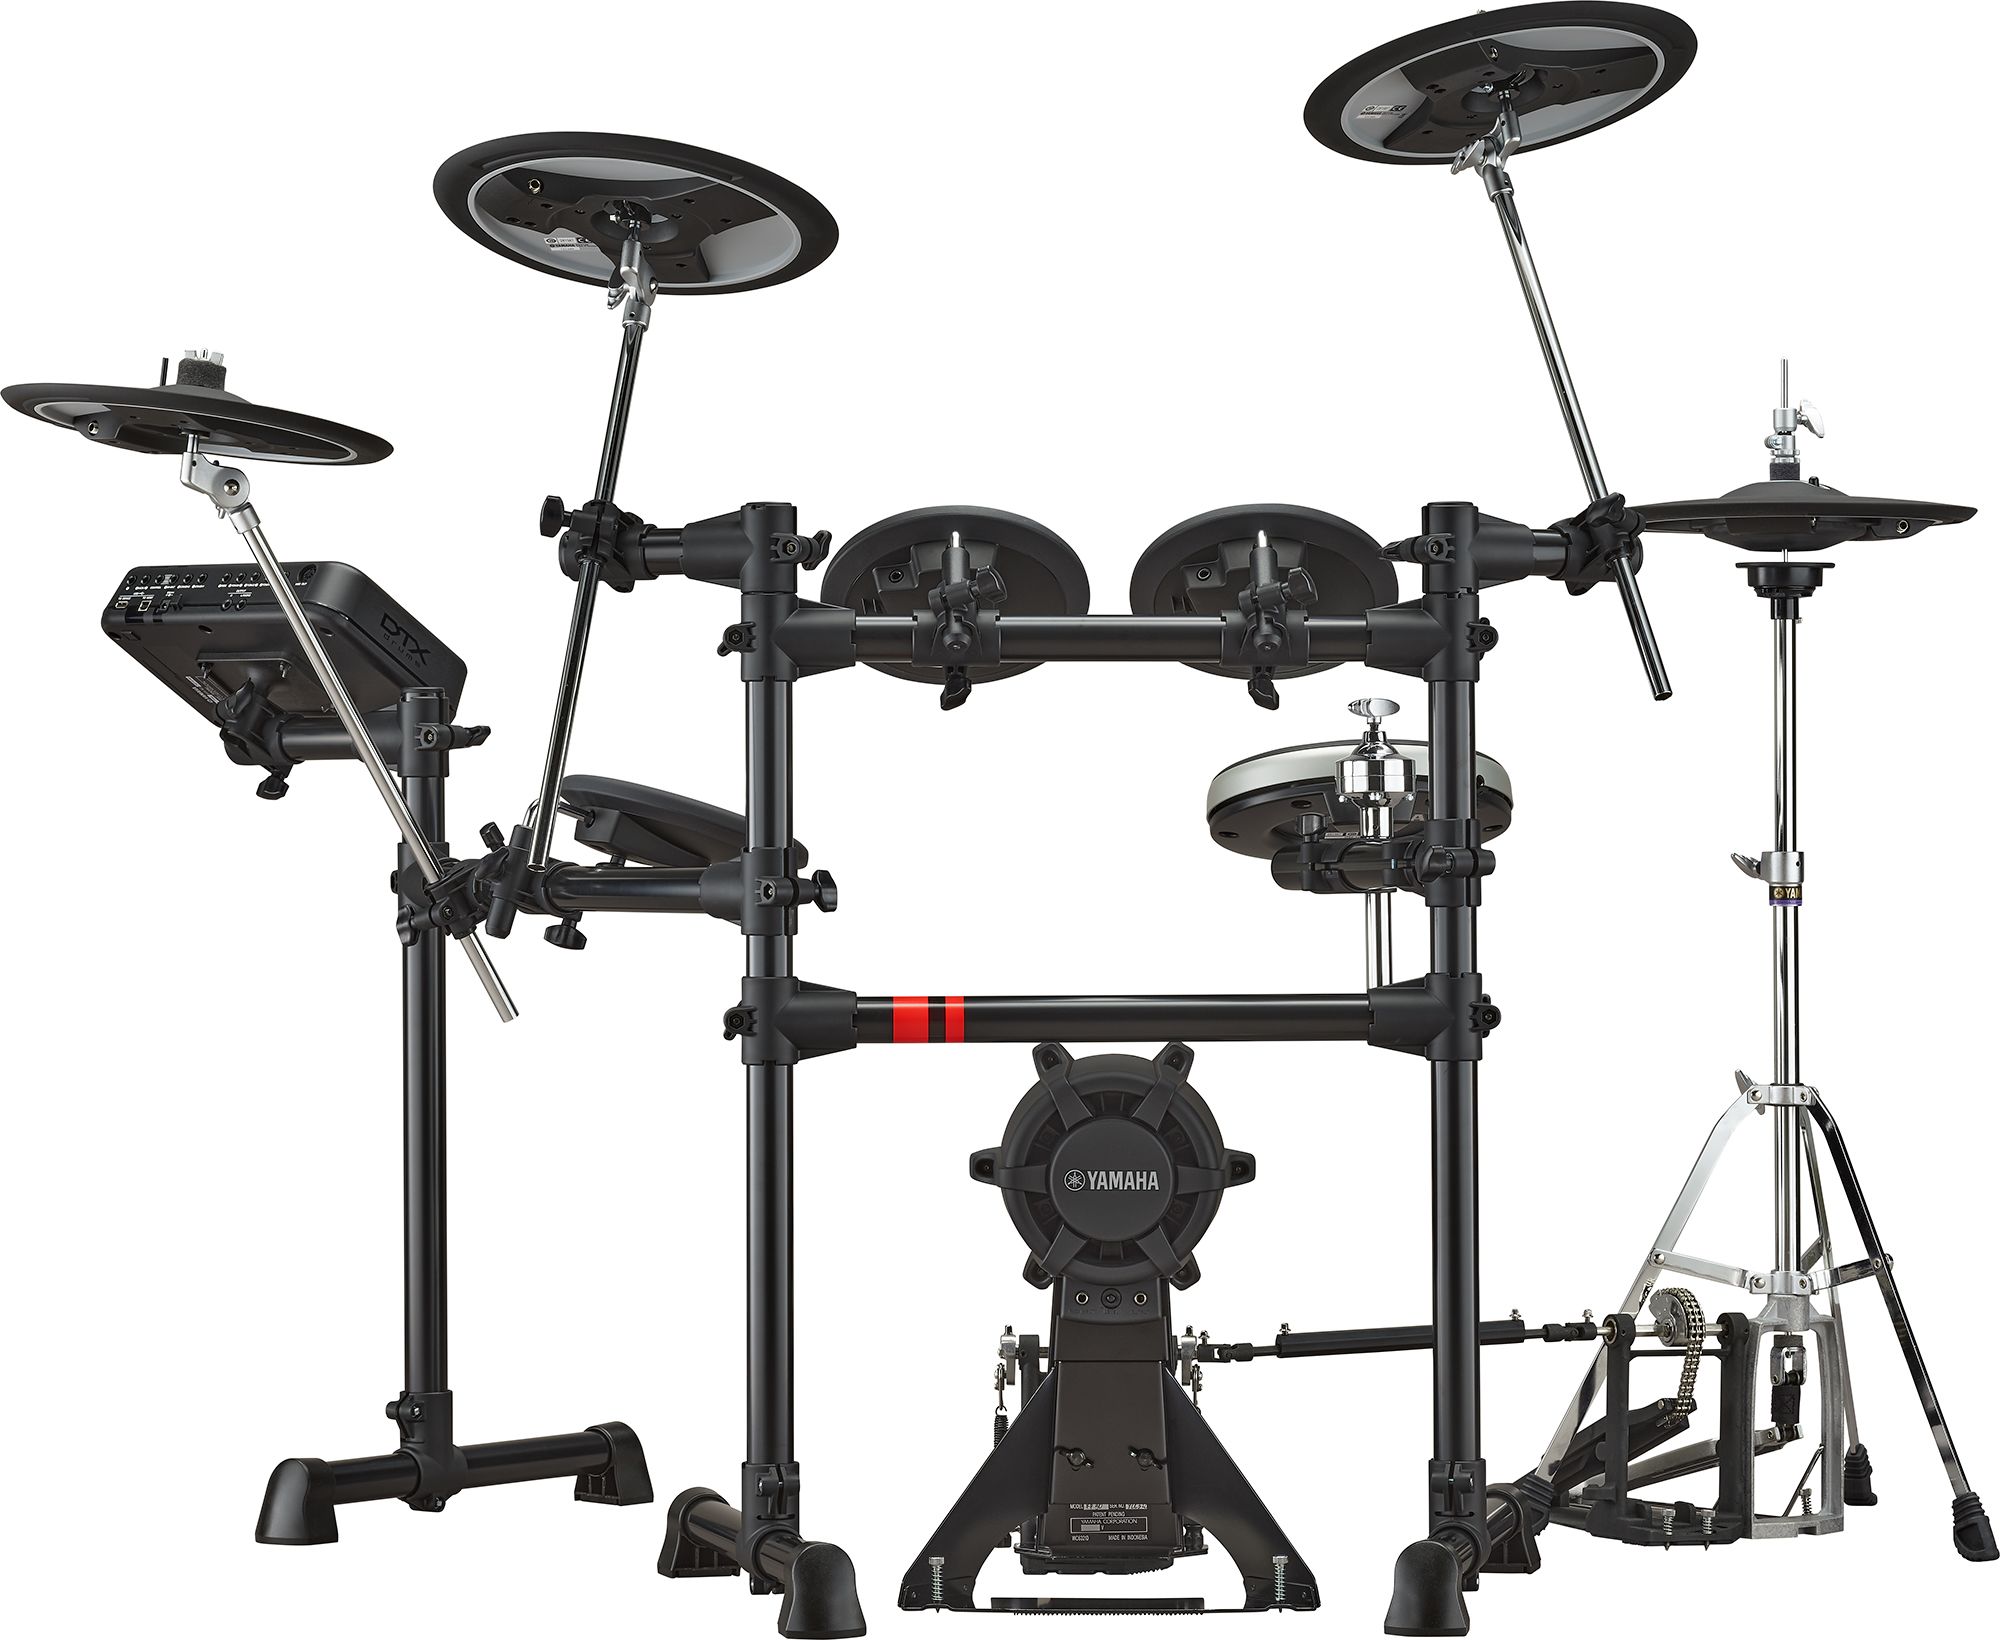 Drum DTX6 - Instruments - - Oceania CIS Kits - / East Middle - Asia Drums / Products / - Musical Products - / / Drums Africa Series Yamaha - Latin America Electronic Electronic